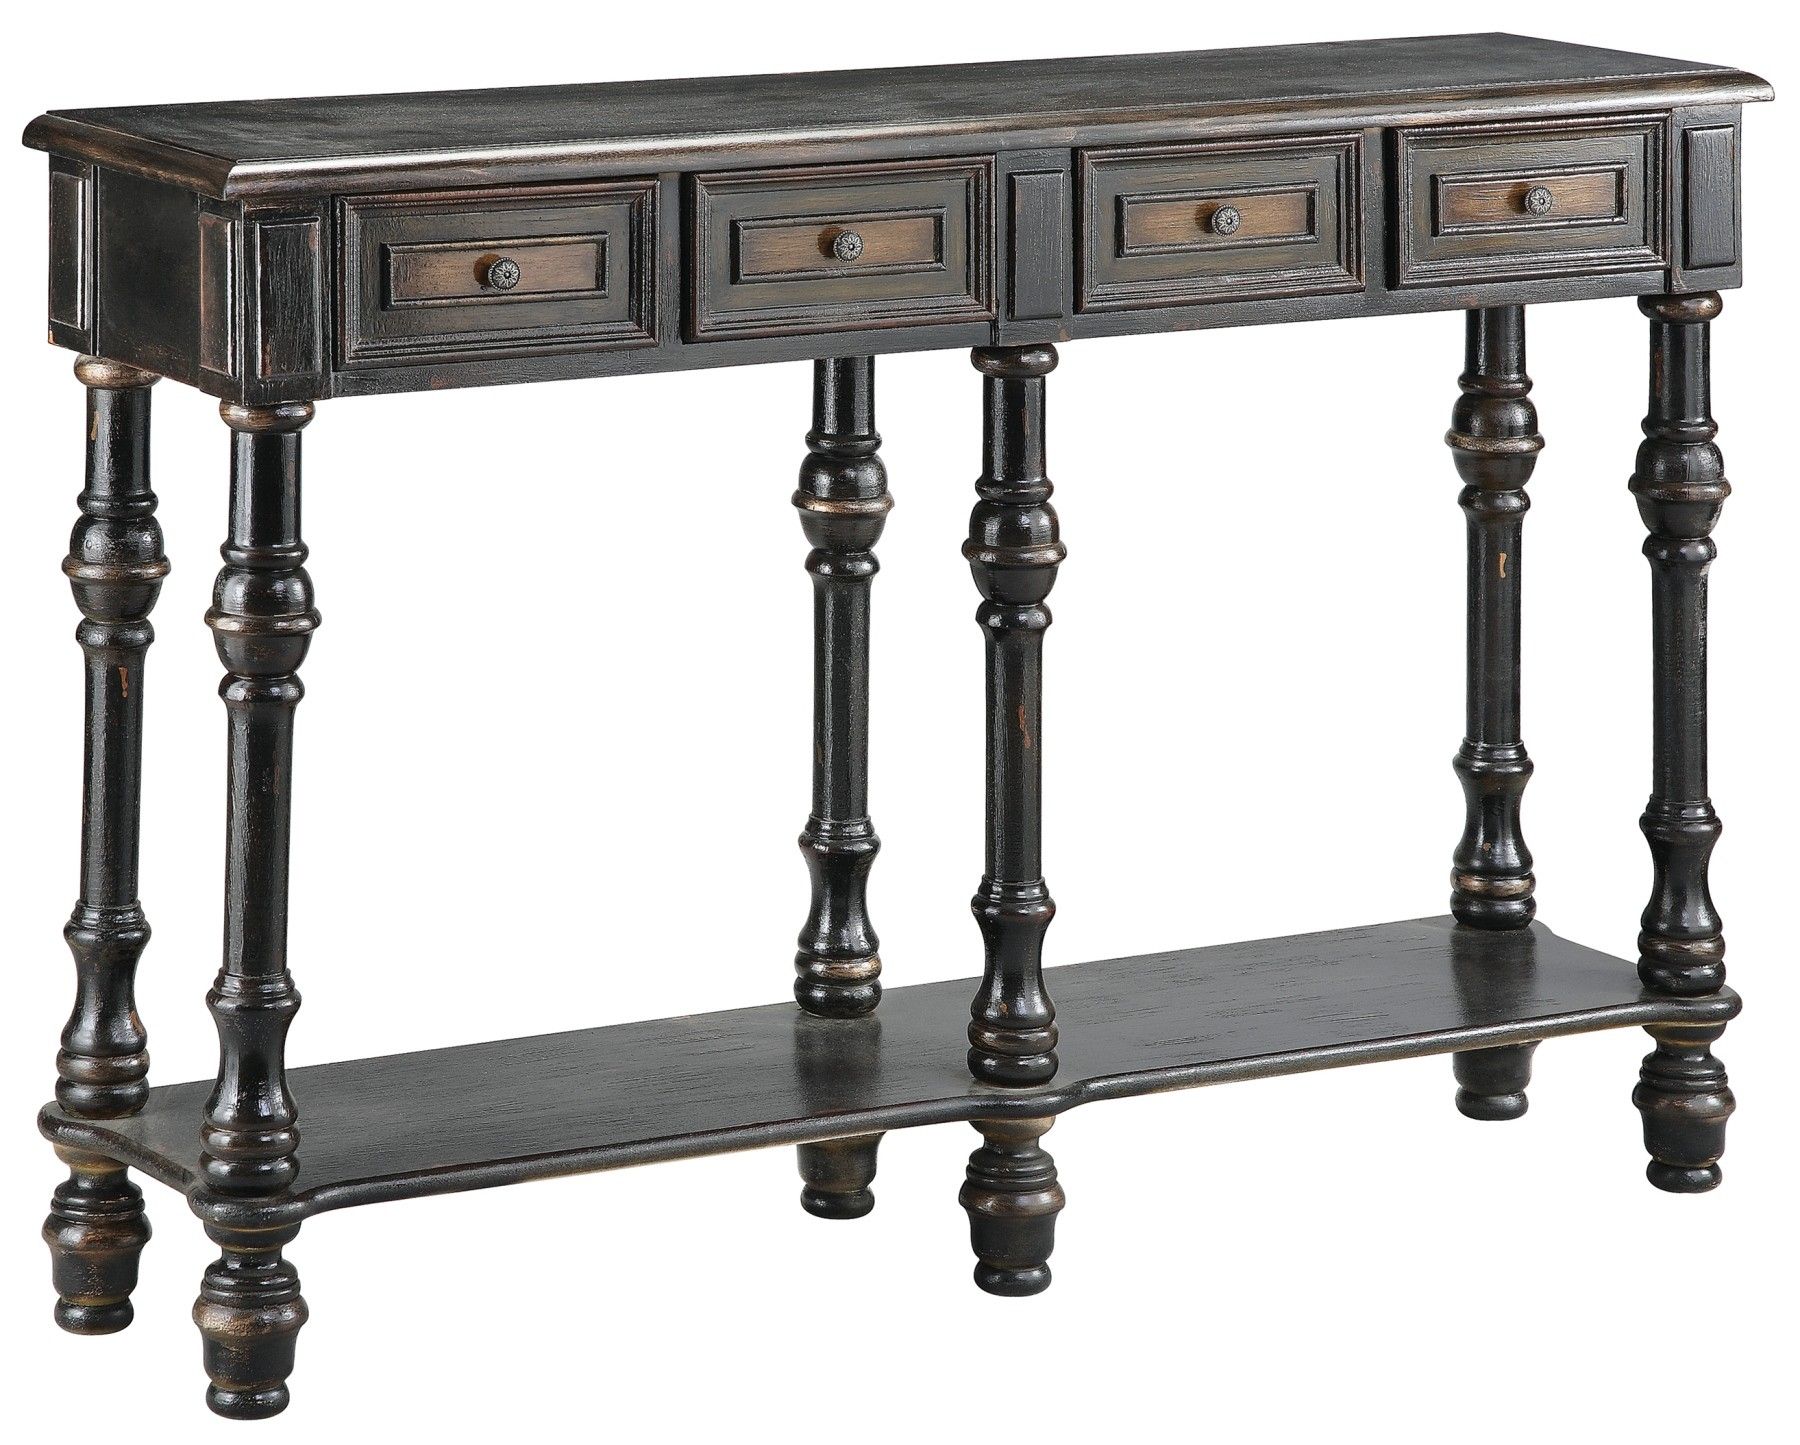 Console Table In Black/brown, 28314, Stein World Intended For Swan Black Console Tables (View 19 of 20)